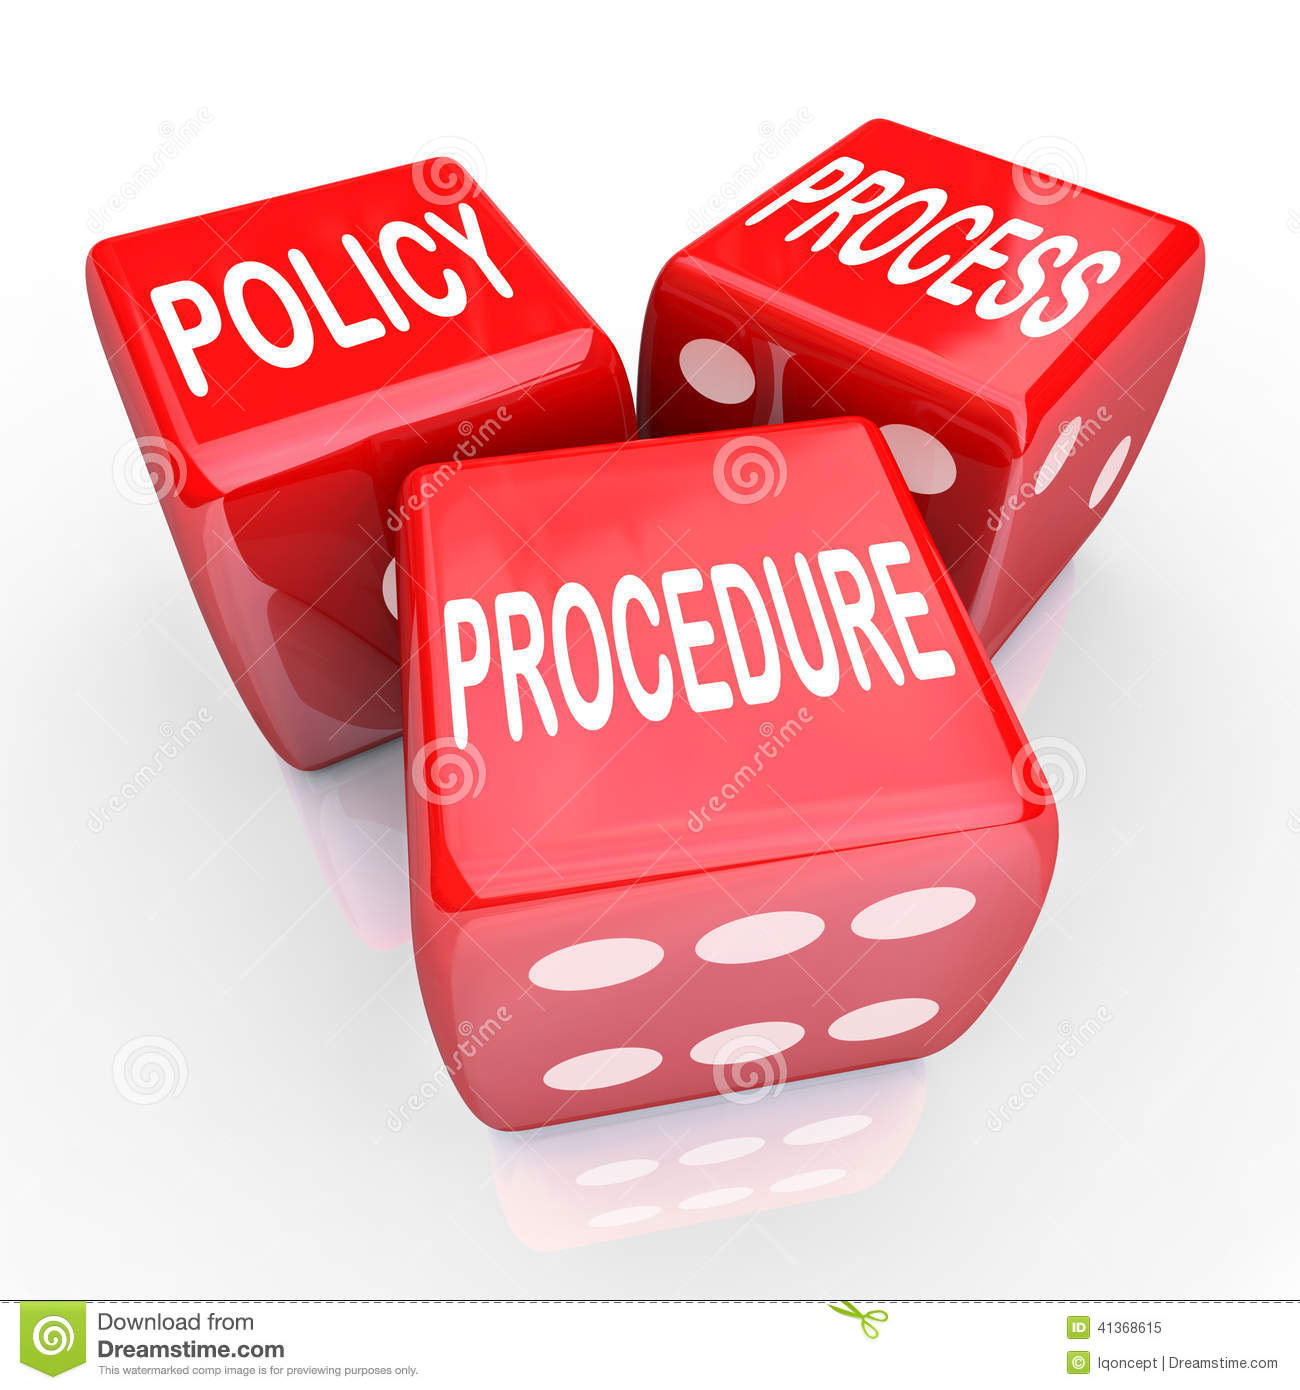 Policy Process And Procedure Words On Three Red Dice To Illustrate A